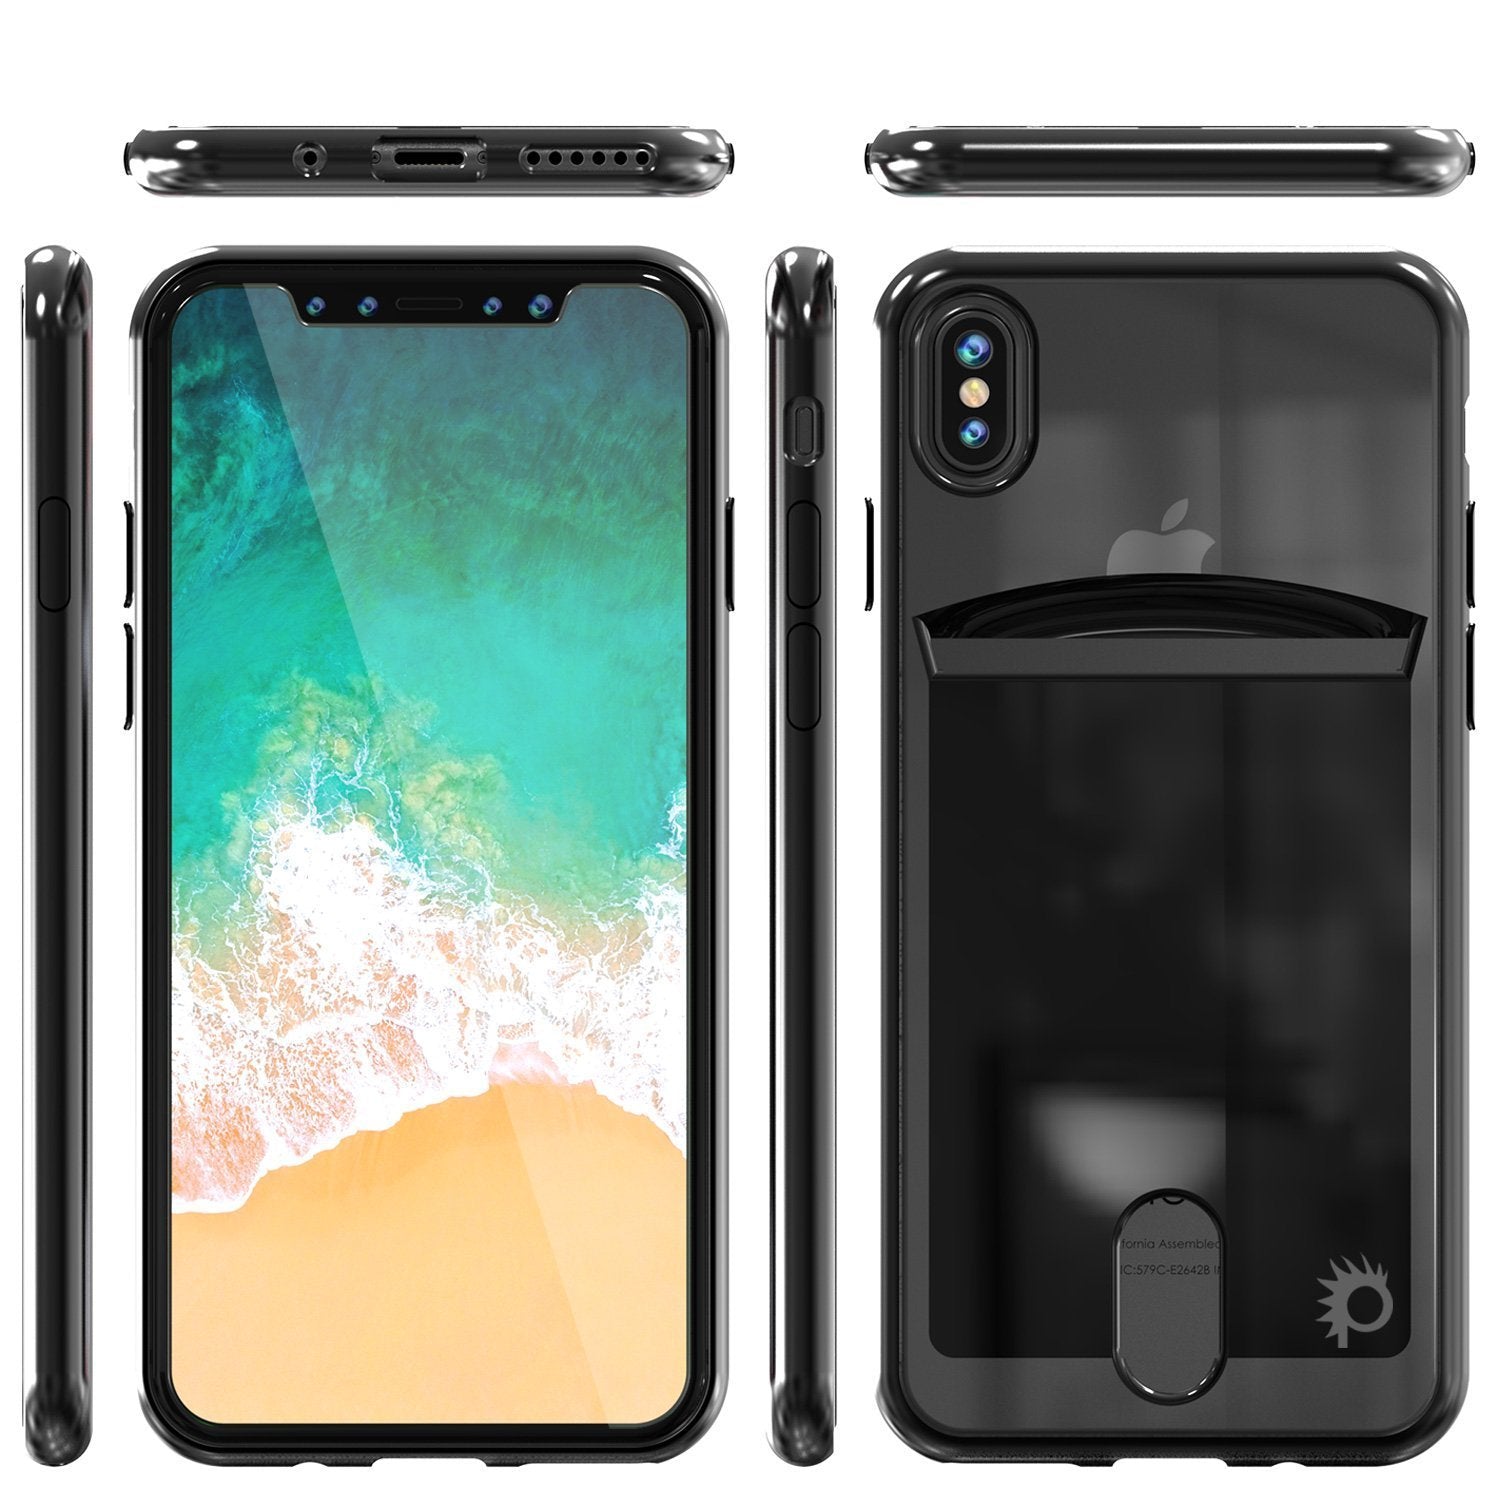 iPhone X Case, PUNKcase [LUCID Series] Slim Fit Protective Dual Layer Armor Cover [Black] - PunkCase NZ